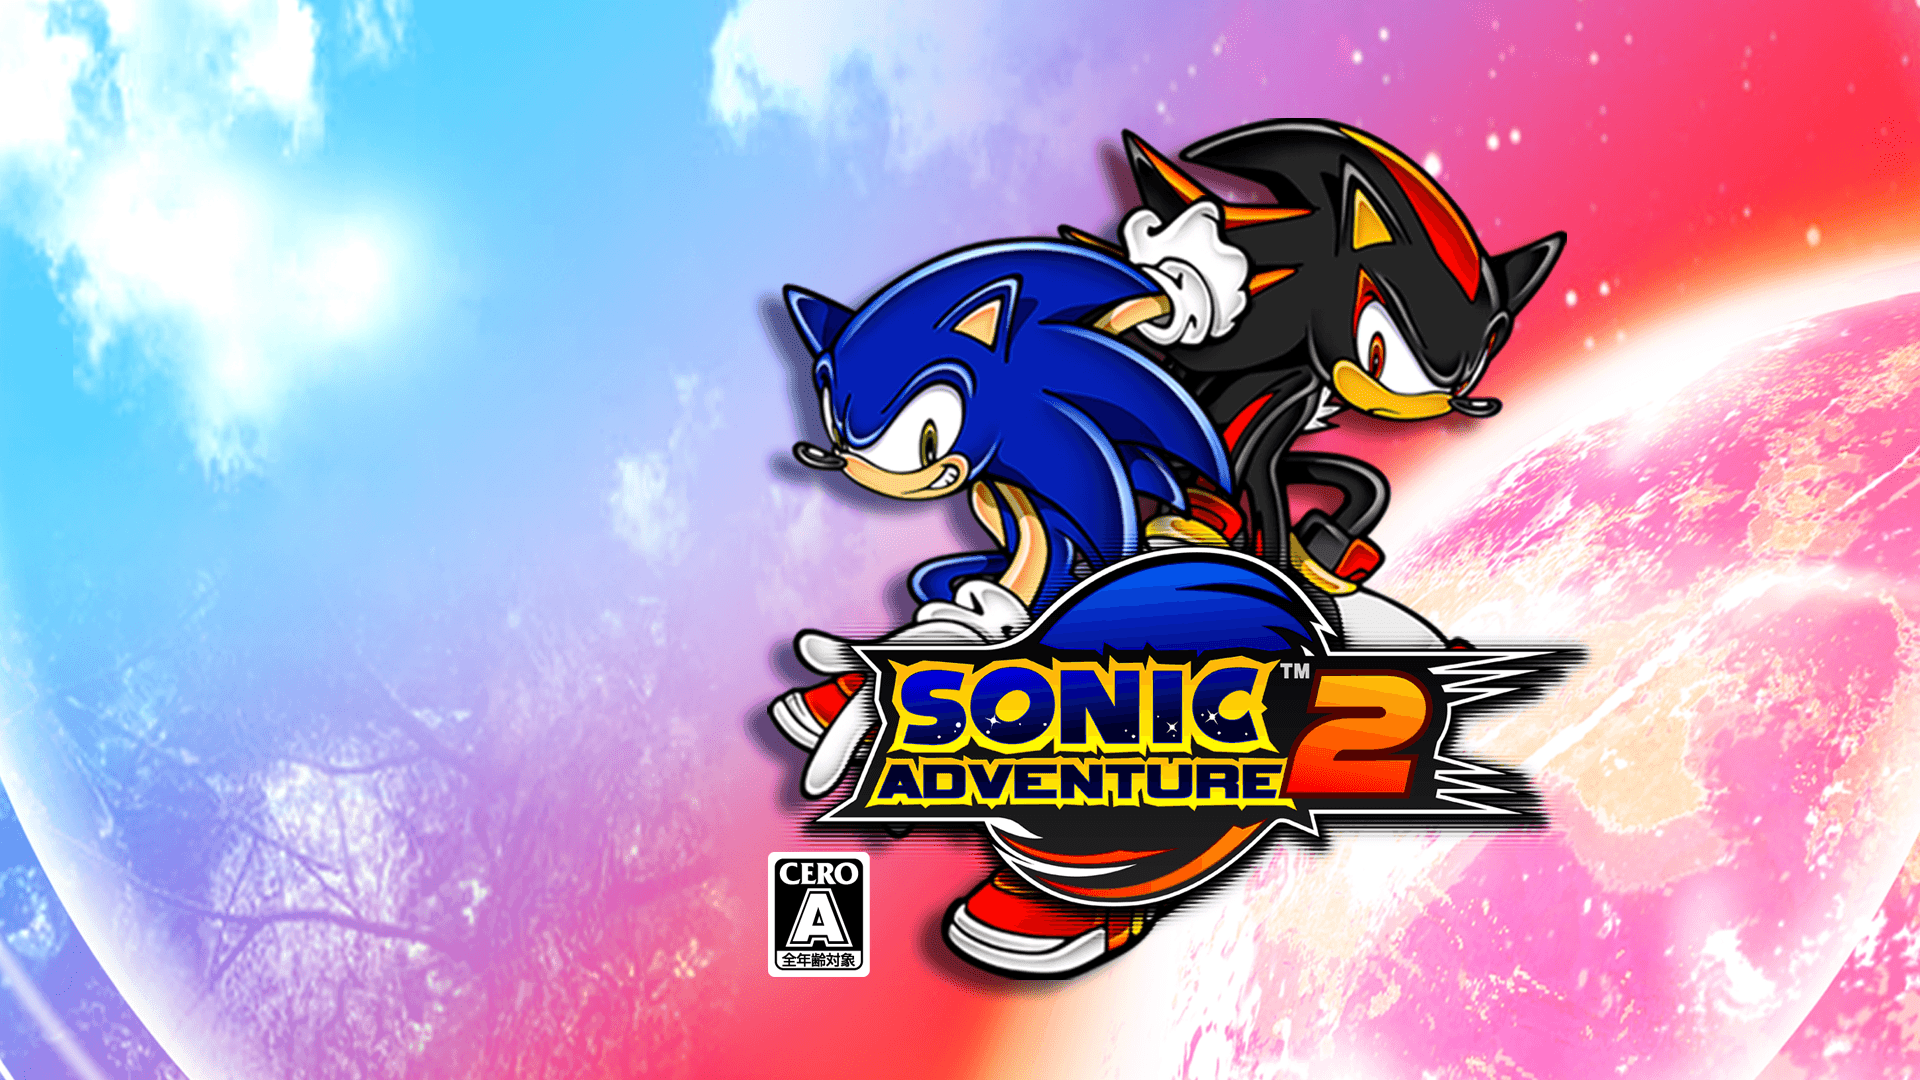 Sonic Adventure 2 Full HD Wallpaper and Background Imagex1080